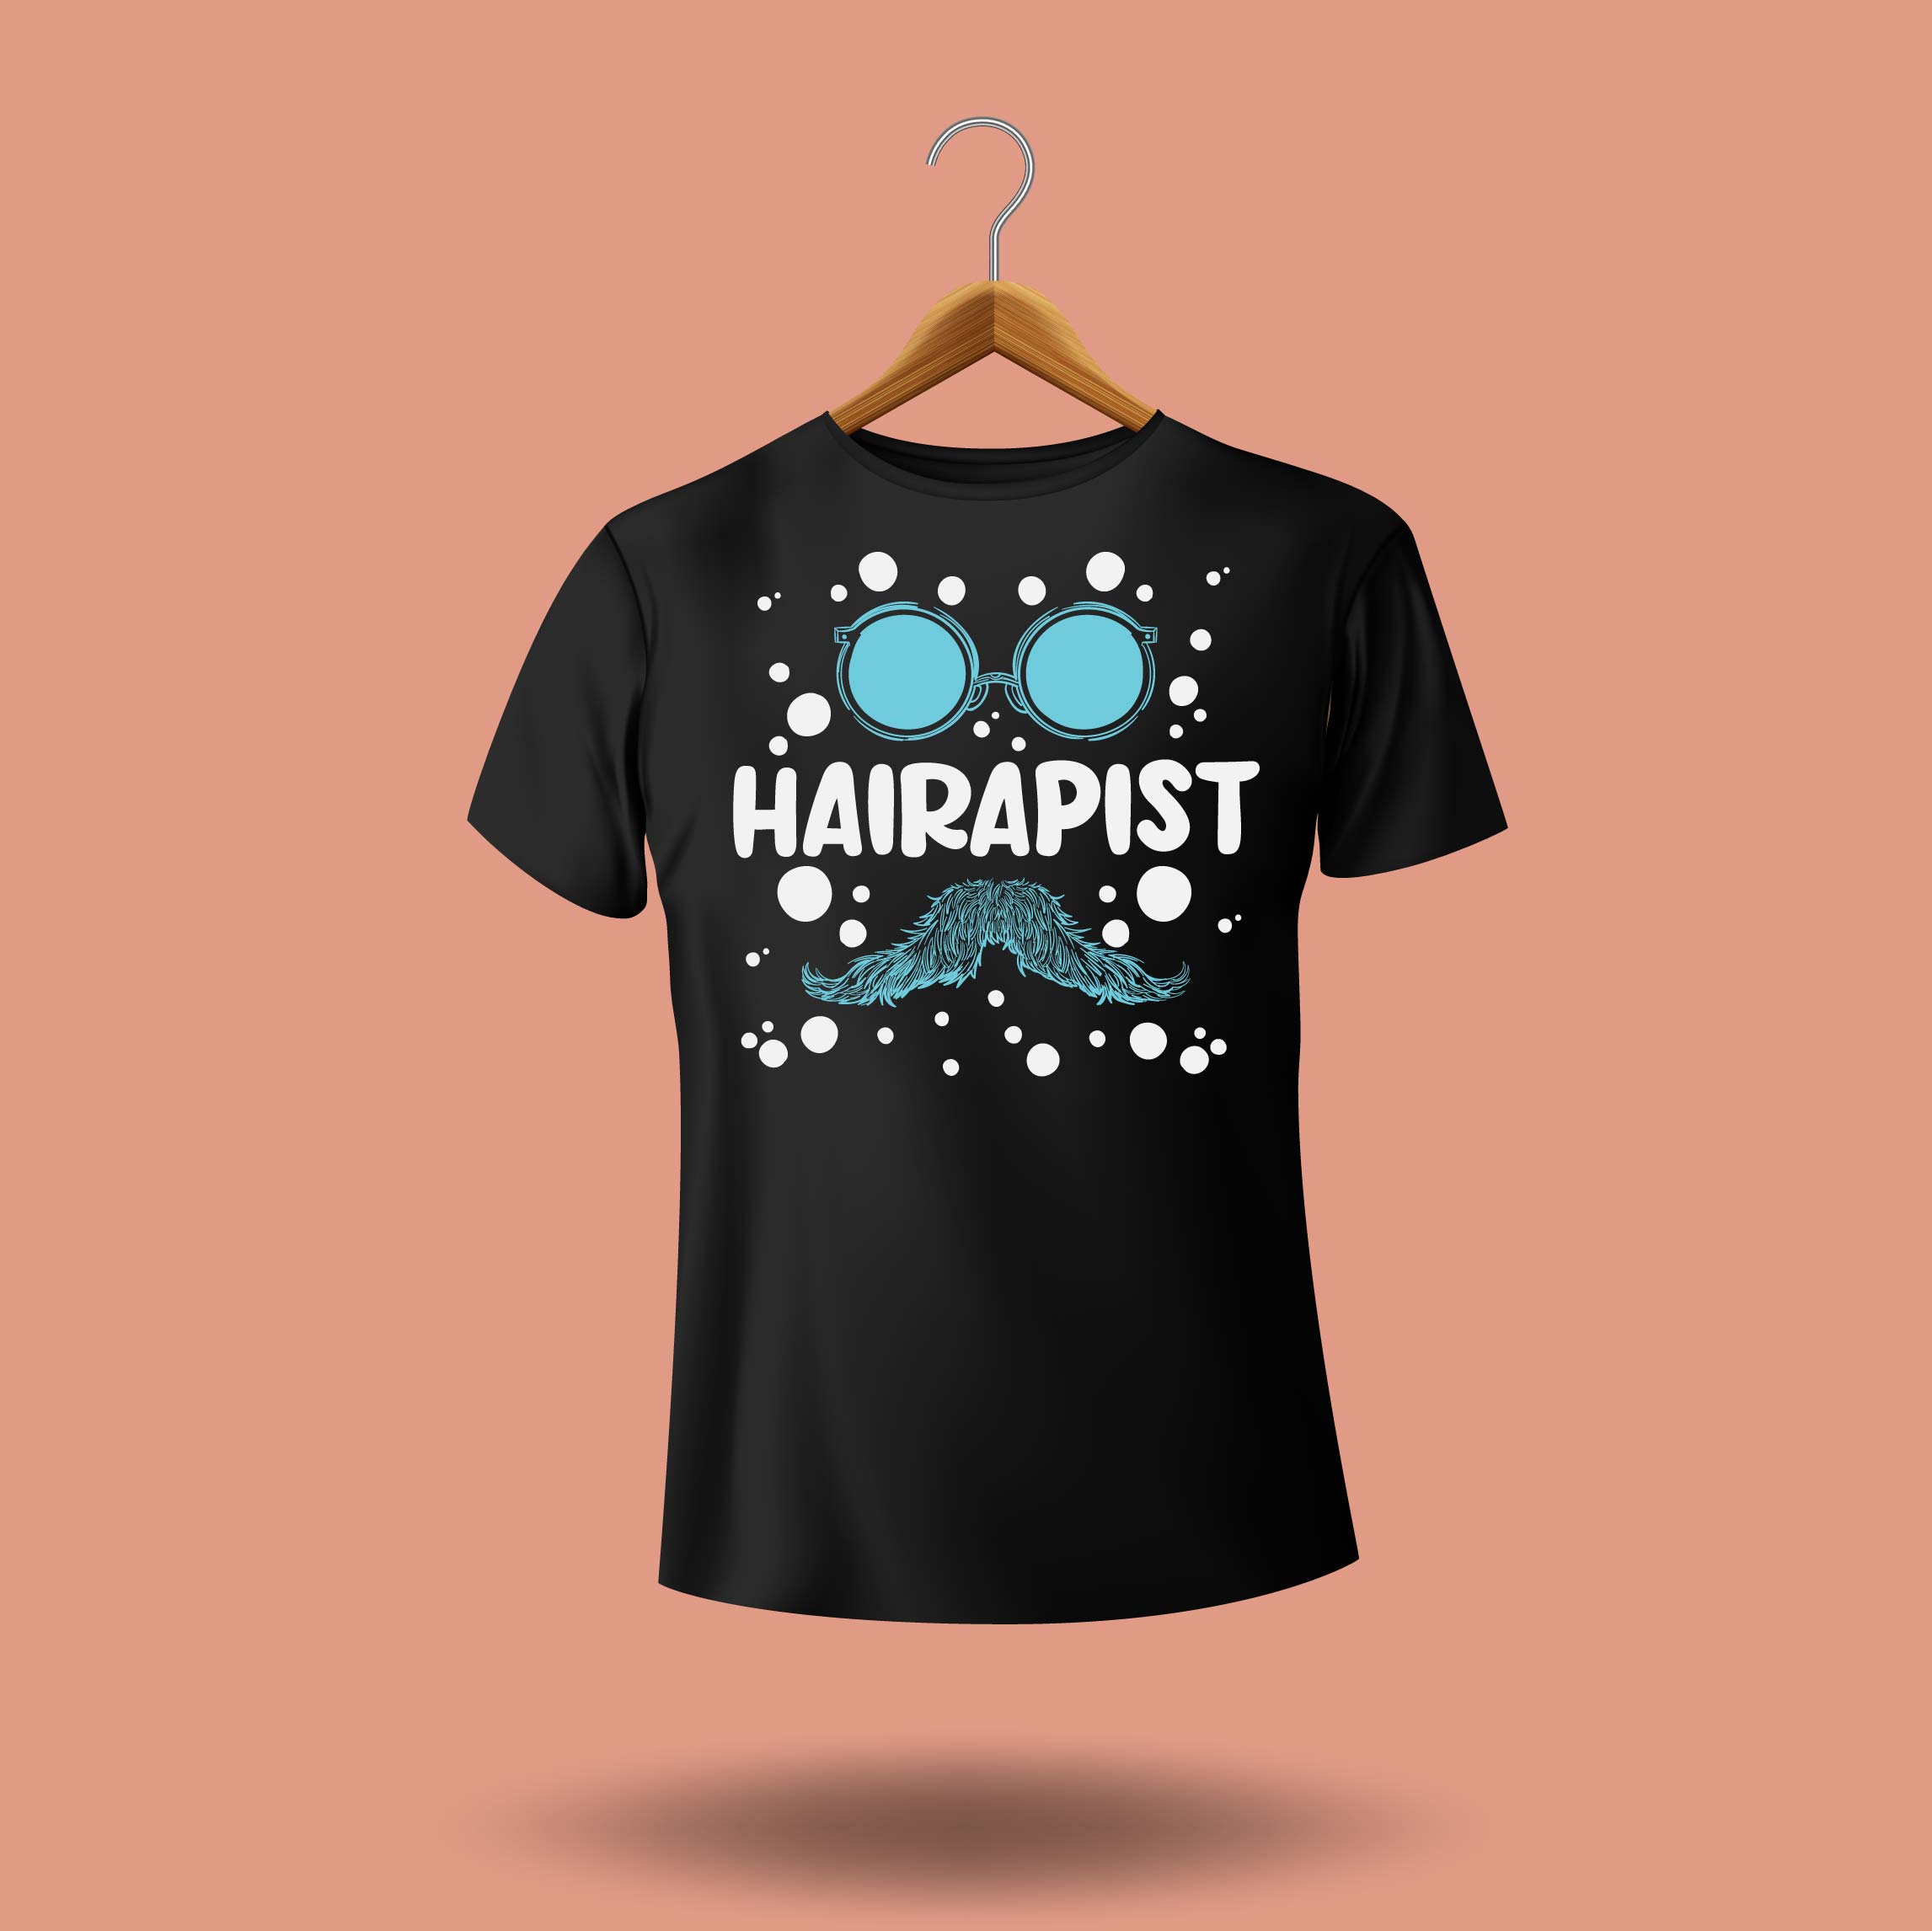 Black t - shirt with the words harrapist printed on it.